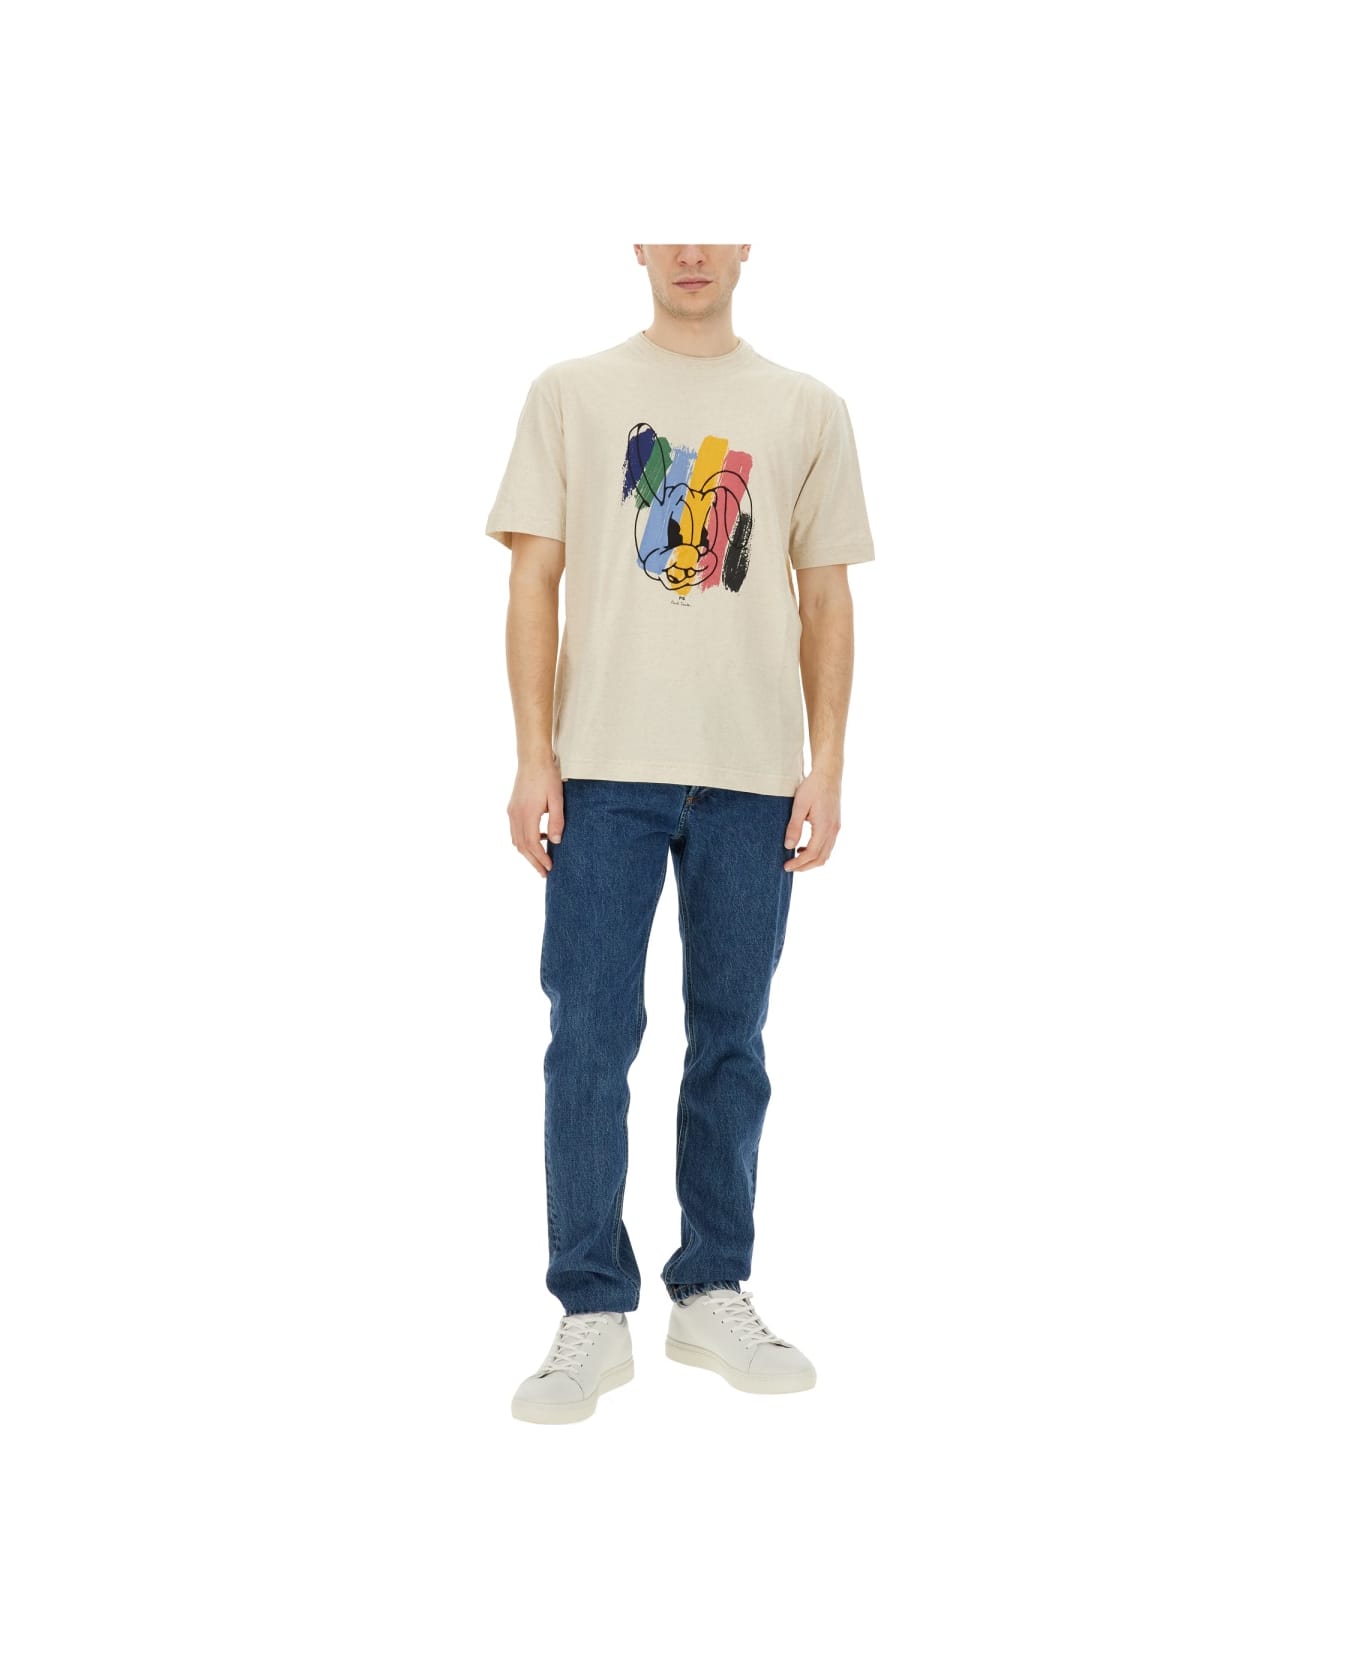 PS by Paul Smith "rabbit" T-shirt - BEIGE シャツ